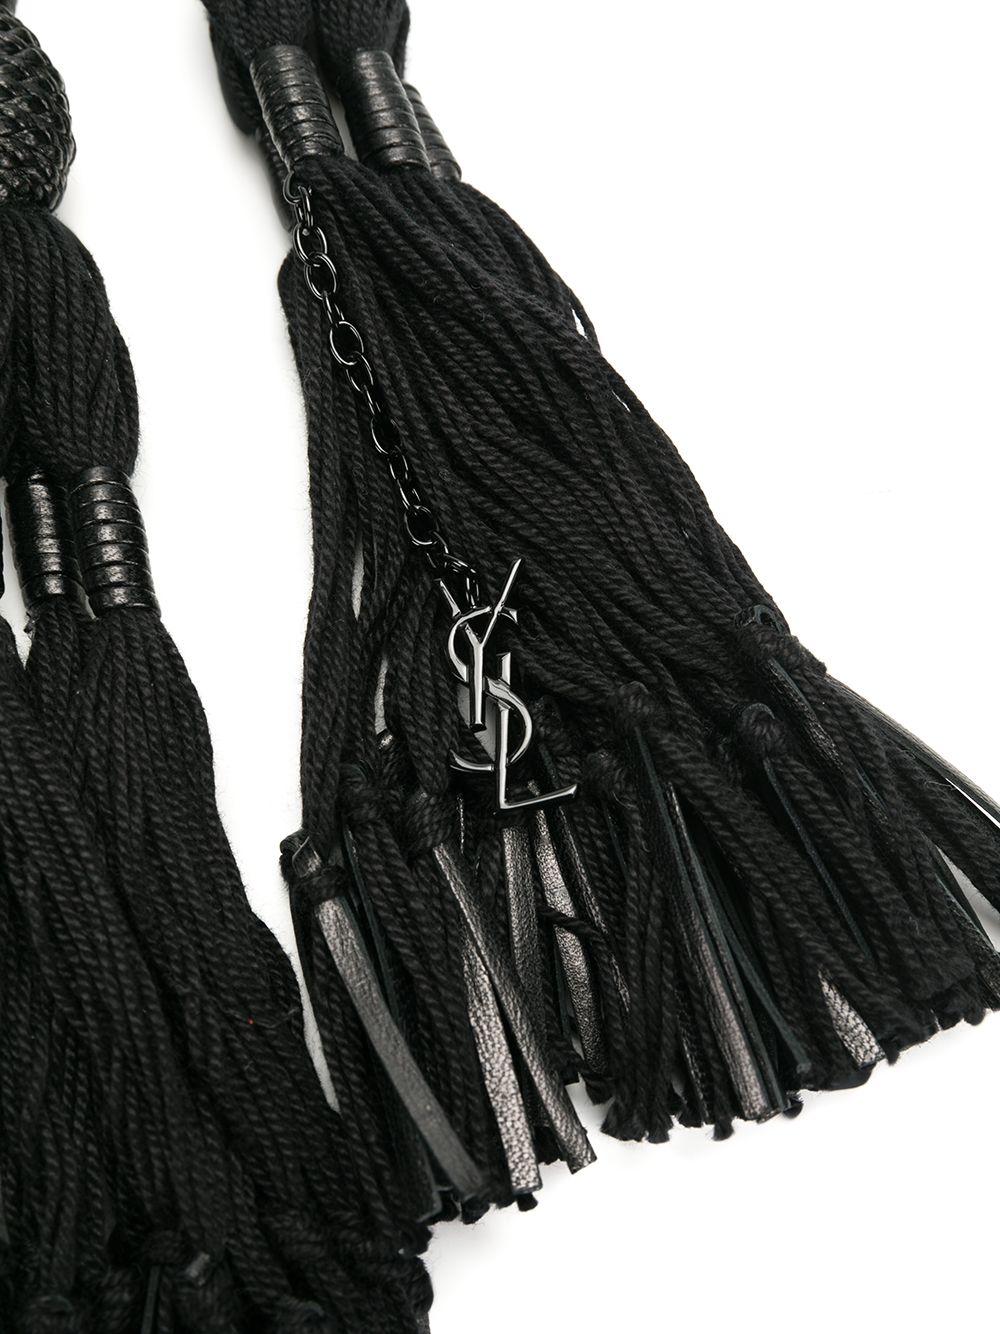 Saint Laurent Black Tassel Knot Cotton & Leather Rope Belt w/ YSL Charm

Saint Laurent's black rope belt is imbued with a 1970s craft-inspired feel. It features swishing tassels and a metal YSL logo charm, and secures via a slip-through fastening.